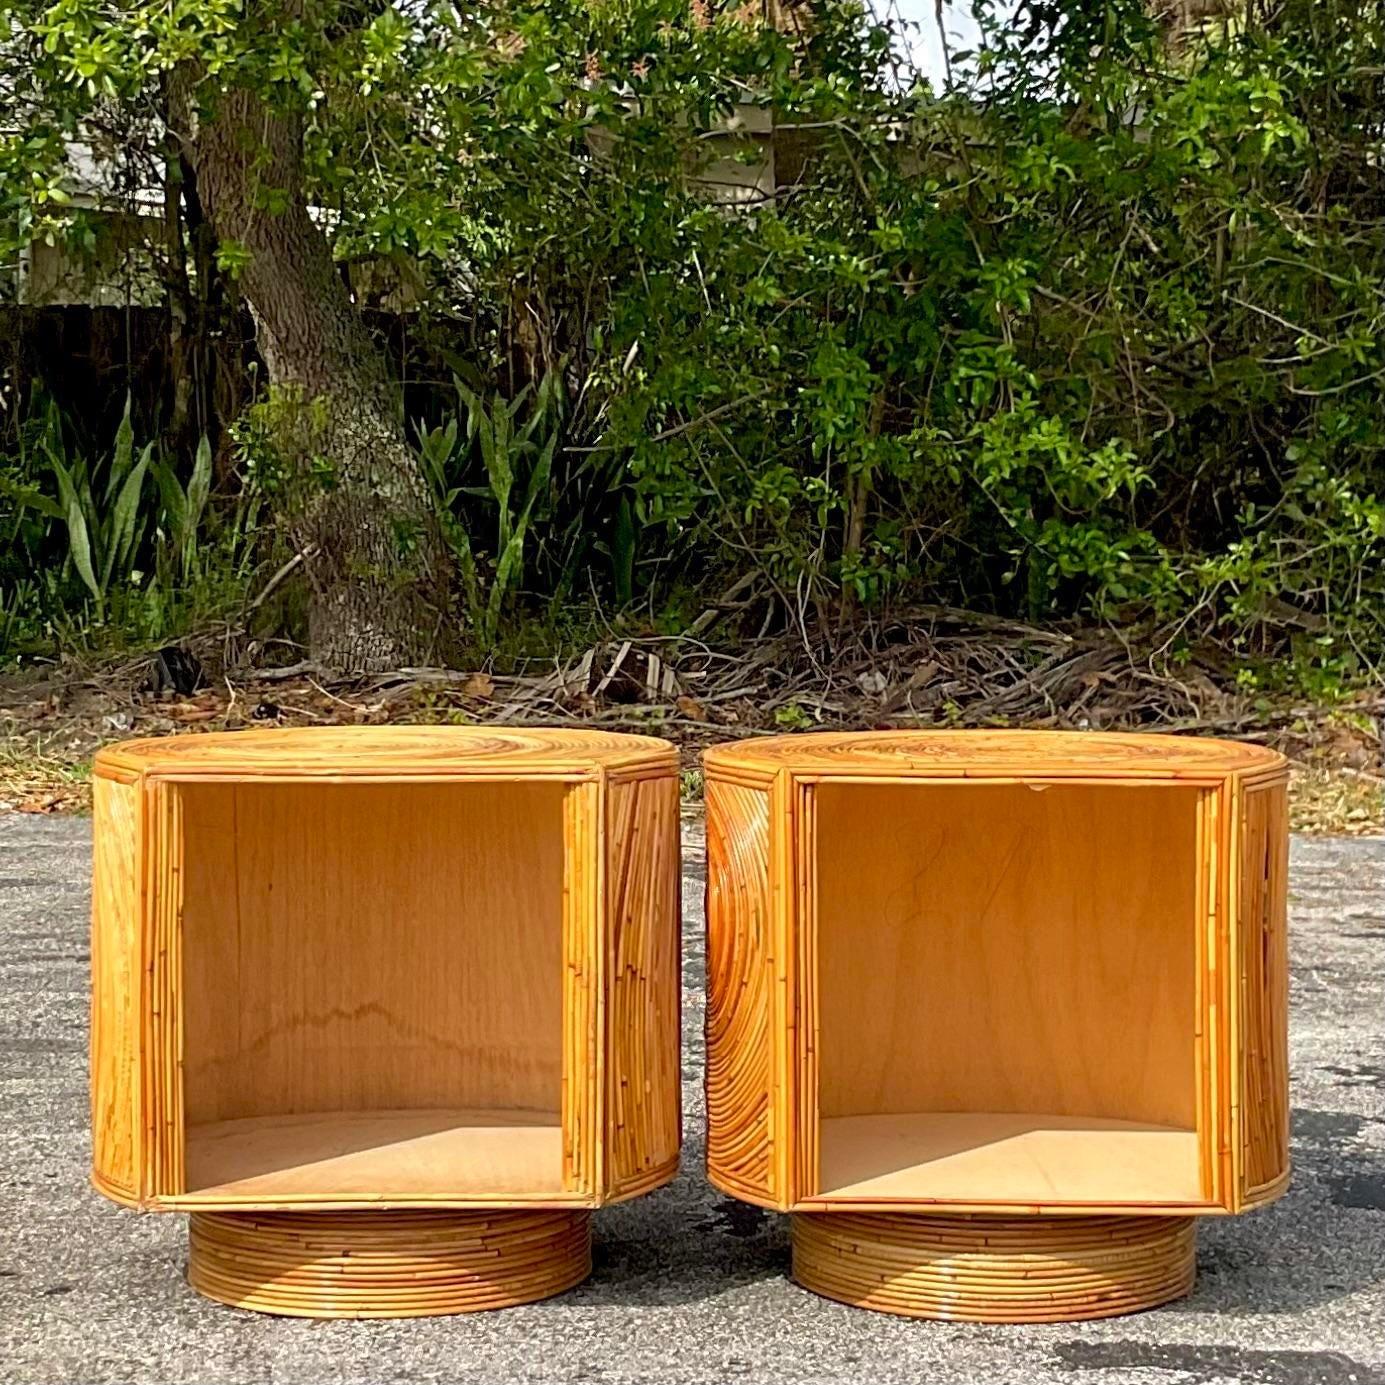 An epic pair of vintage Coastal nightstands. A chic pencil reed cabinet on a swivel base. Look great with the open side forward or closed. You decide! Acquired from a Palm Beach estate.